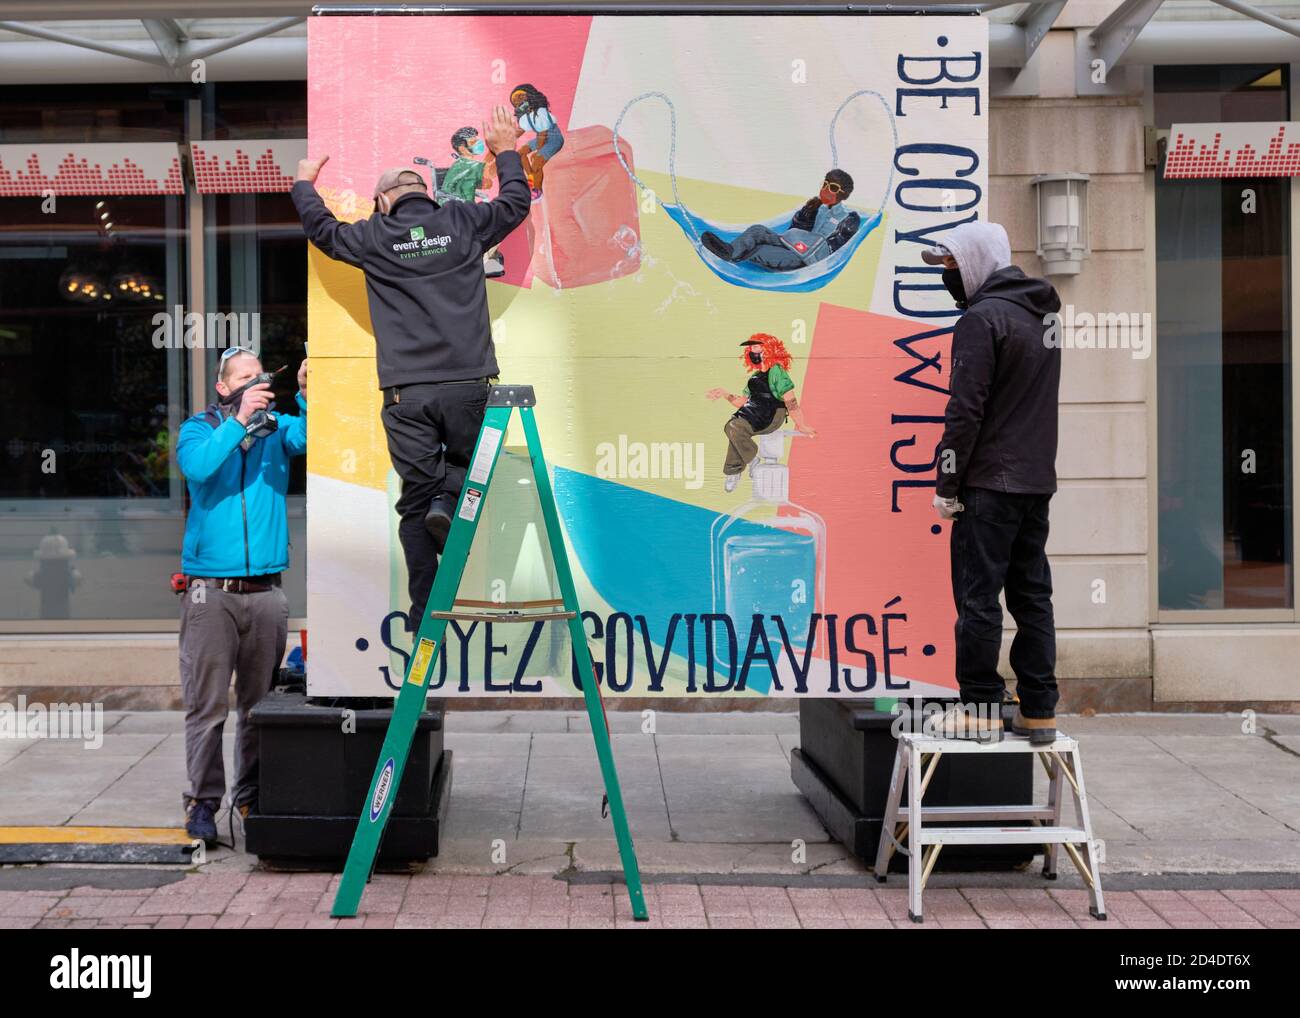 Ottawa, Canada. October 8, 2020.  Crew installing a new bilingual 'Be CovidWise' art display on Sparks Street Stock Photo